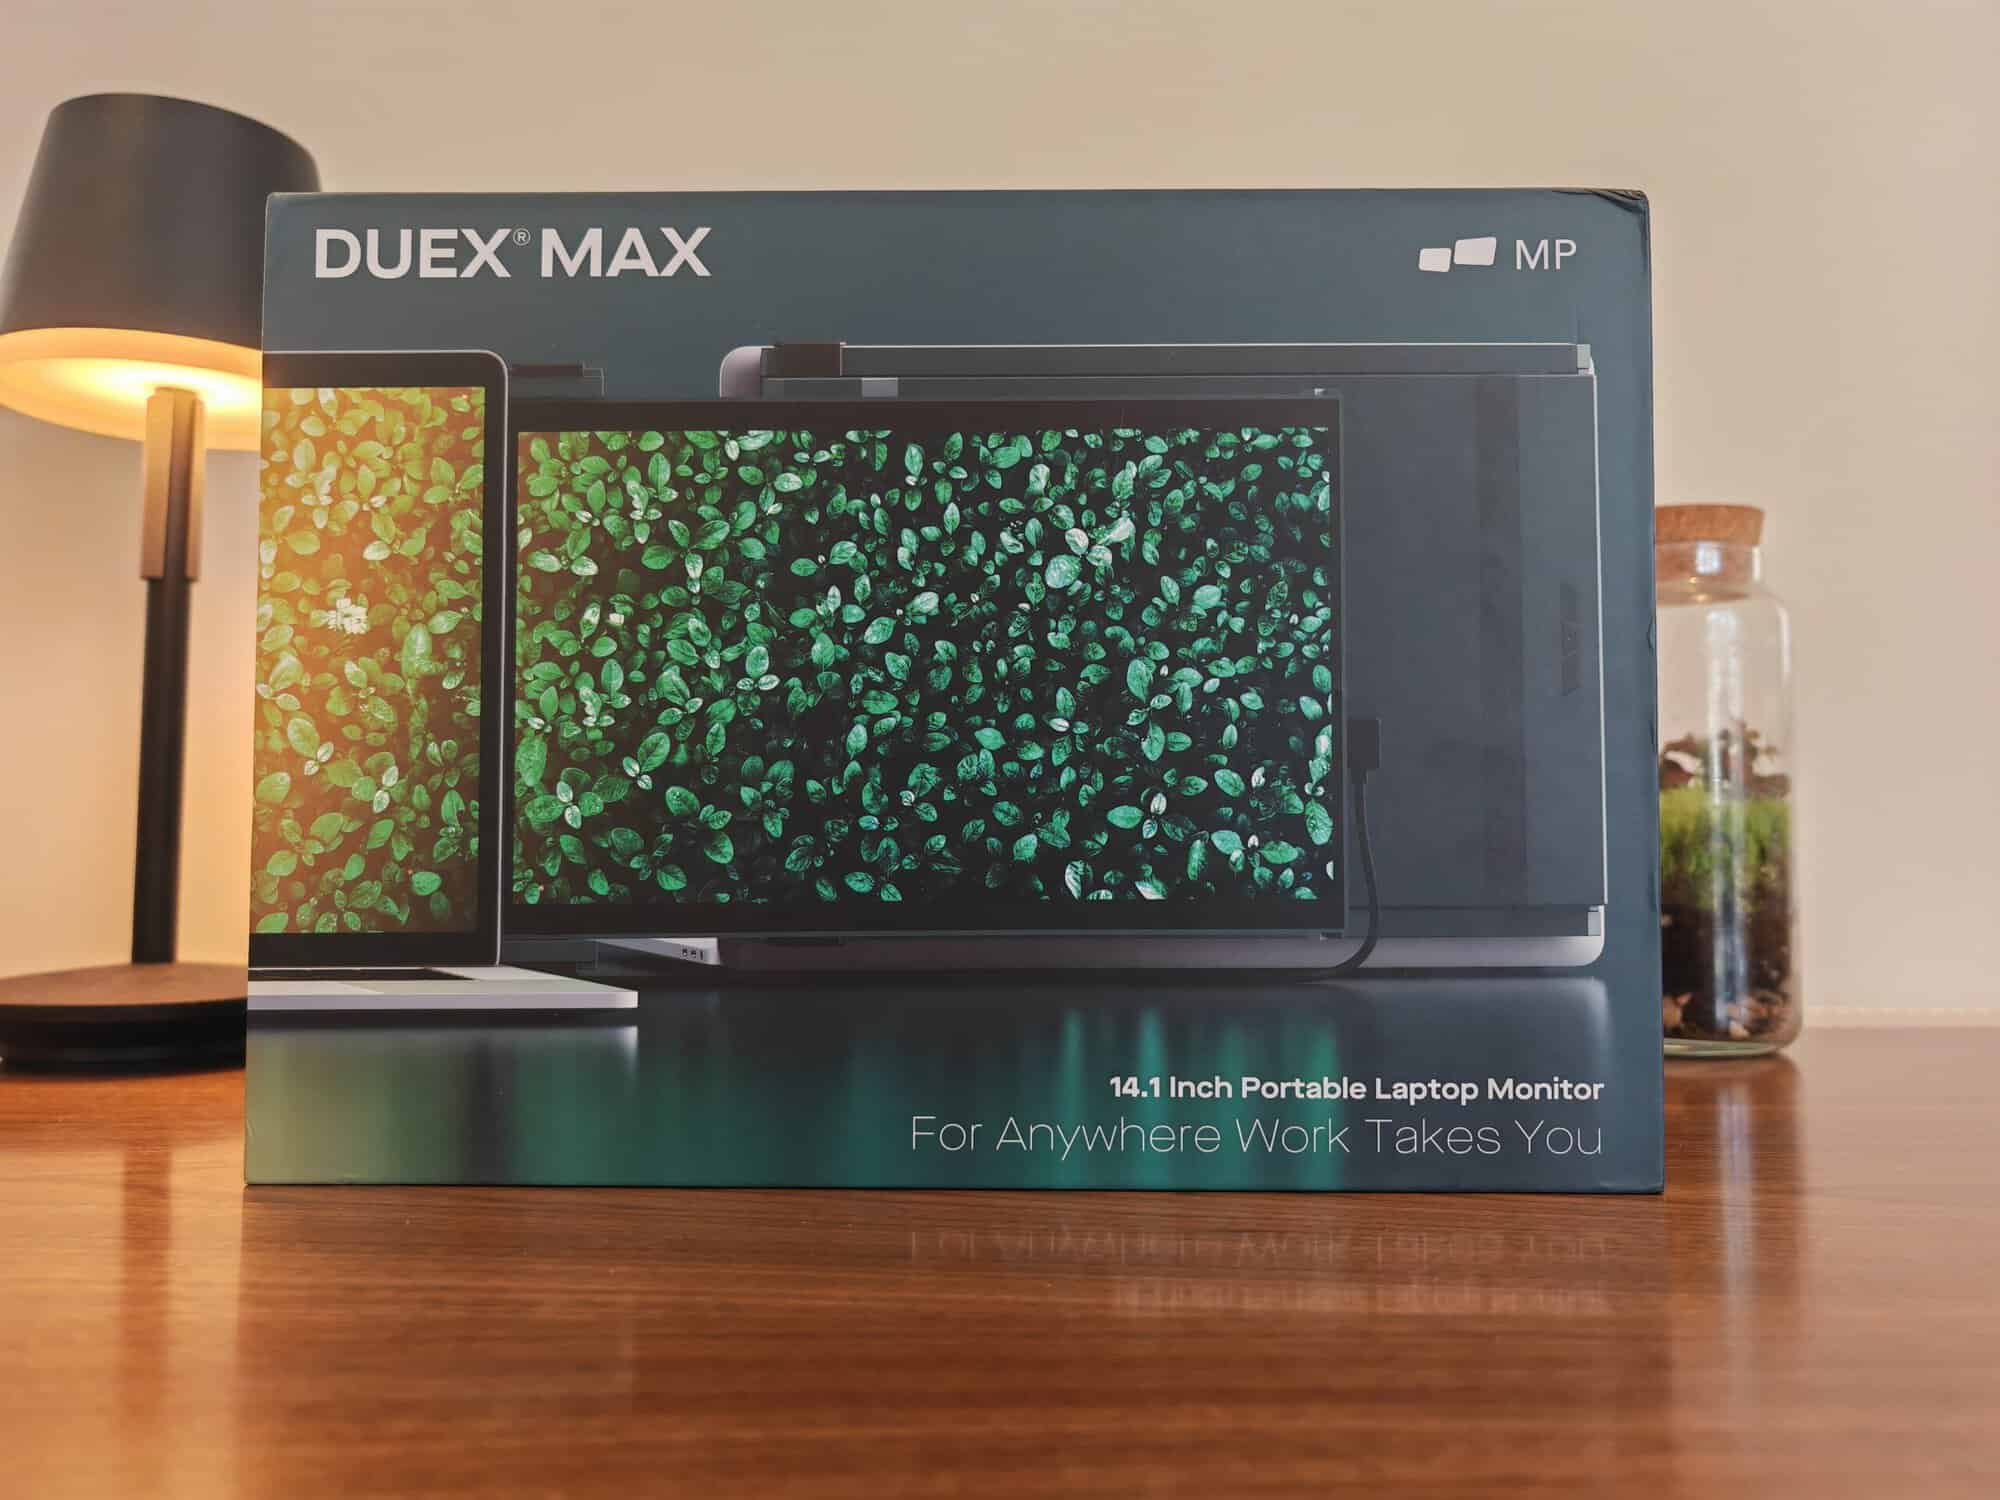 Mobile Pixels Duex Max Portable Monitor Review: Improved design vs Trio & Ideal For Working When Travelling